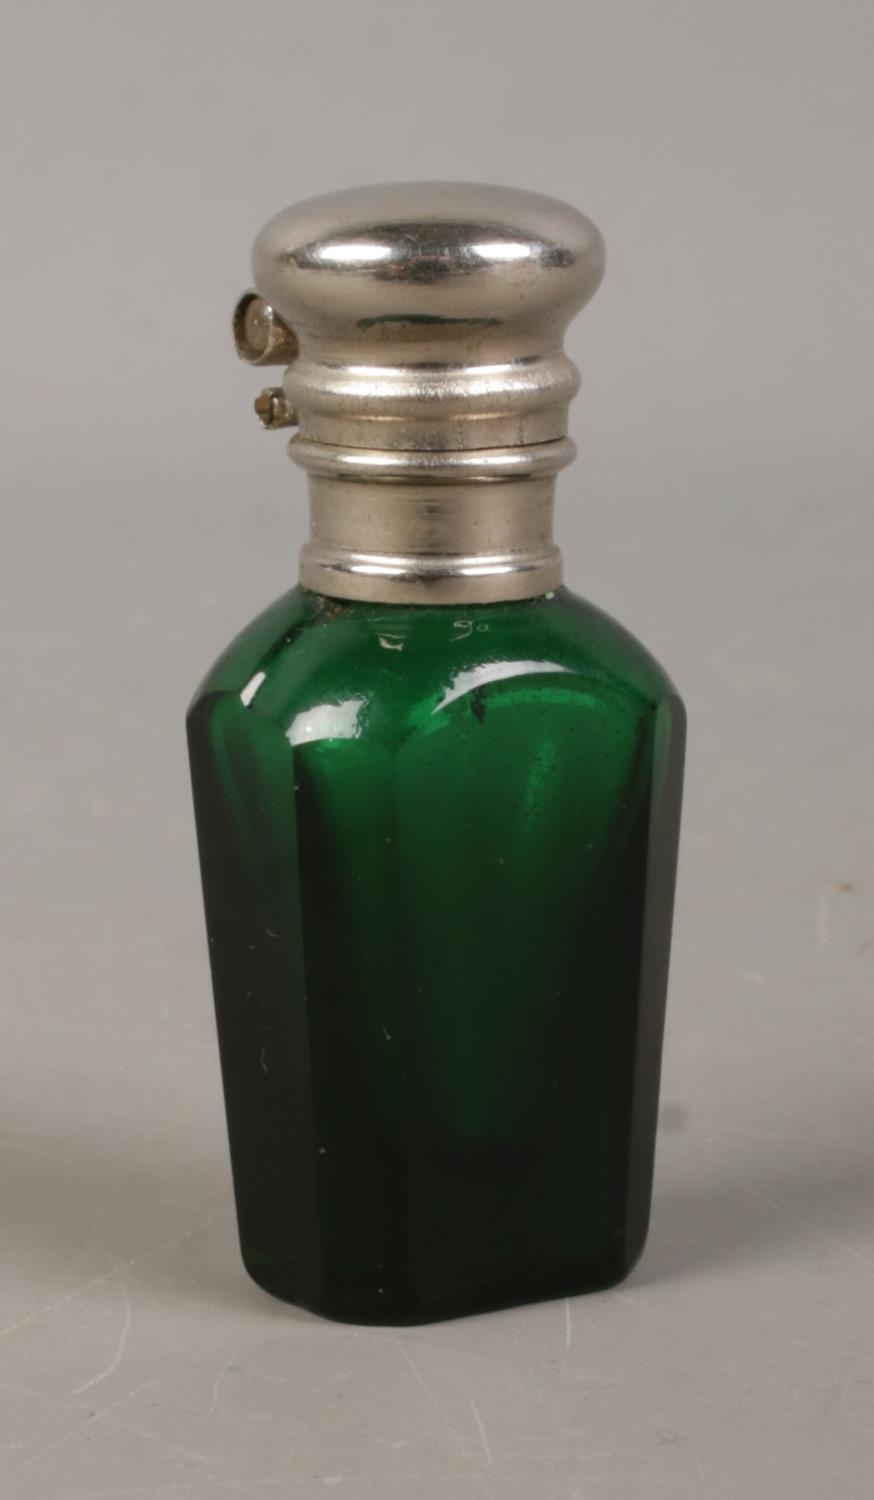 A green glass scent bottle with Stanhope depicting Lennox Castle: "In Memory of Lennoxtown and